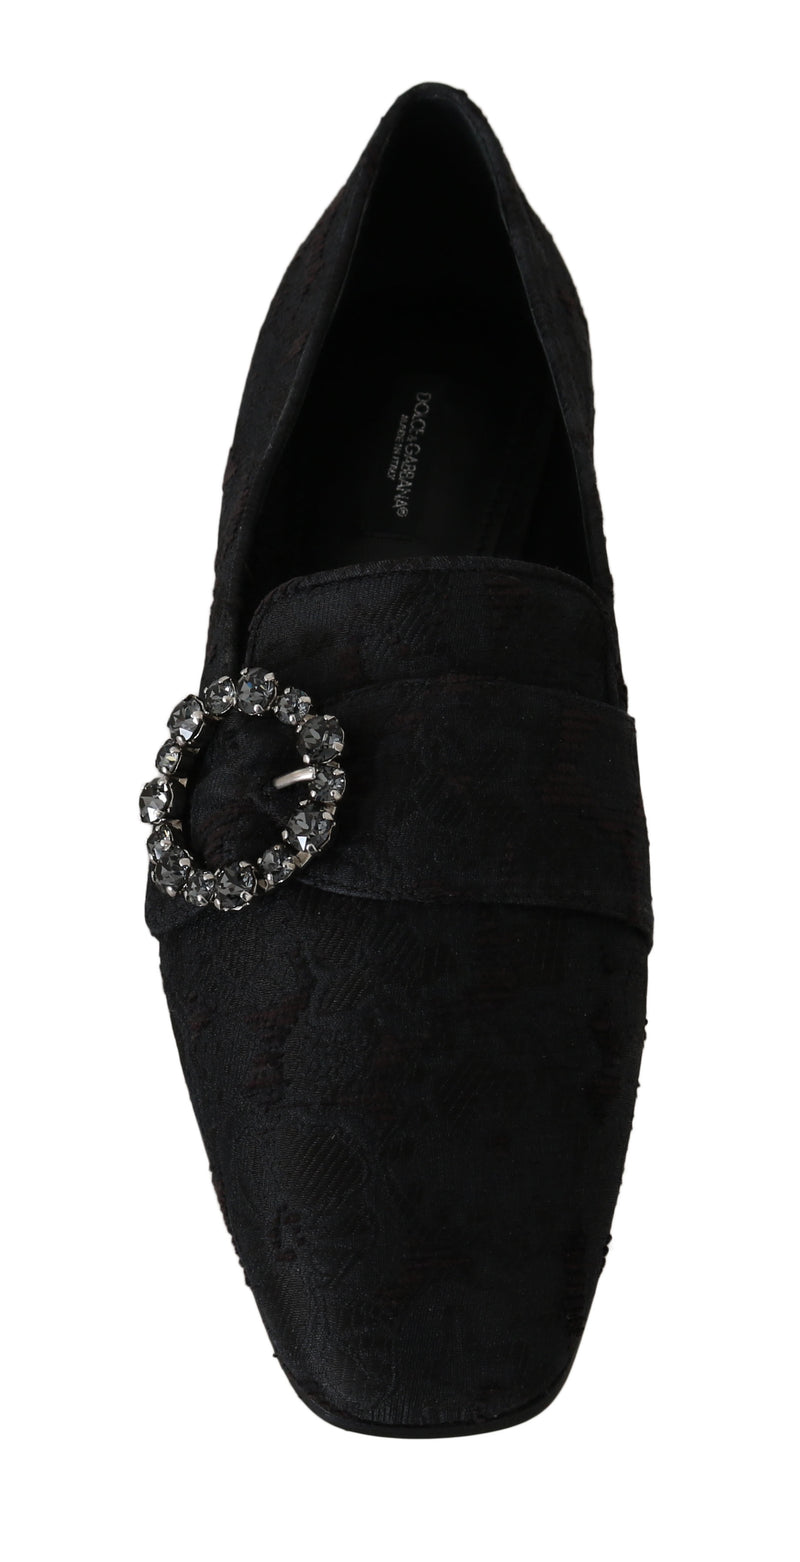 Jacquard Floral Crystal Loafers